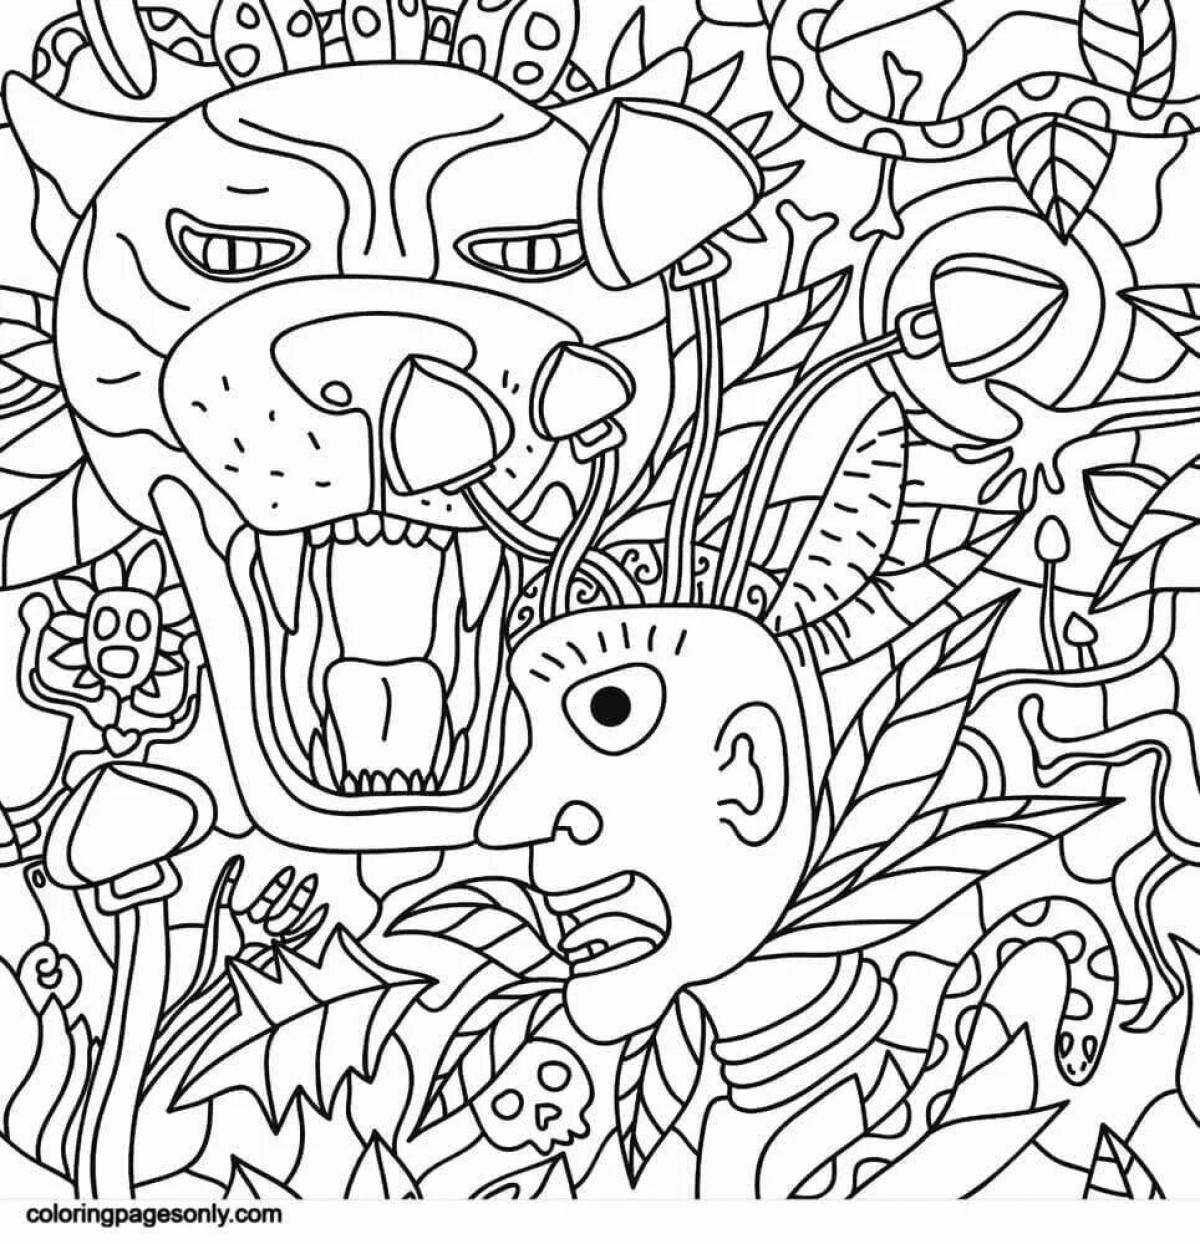 Mystical psychedelic coloring book